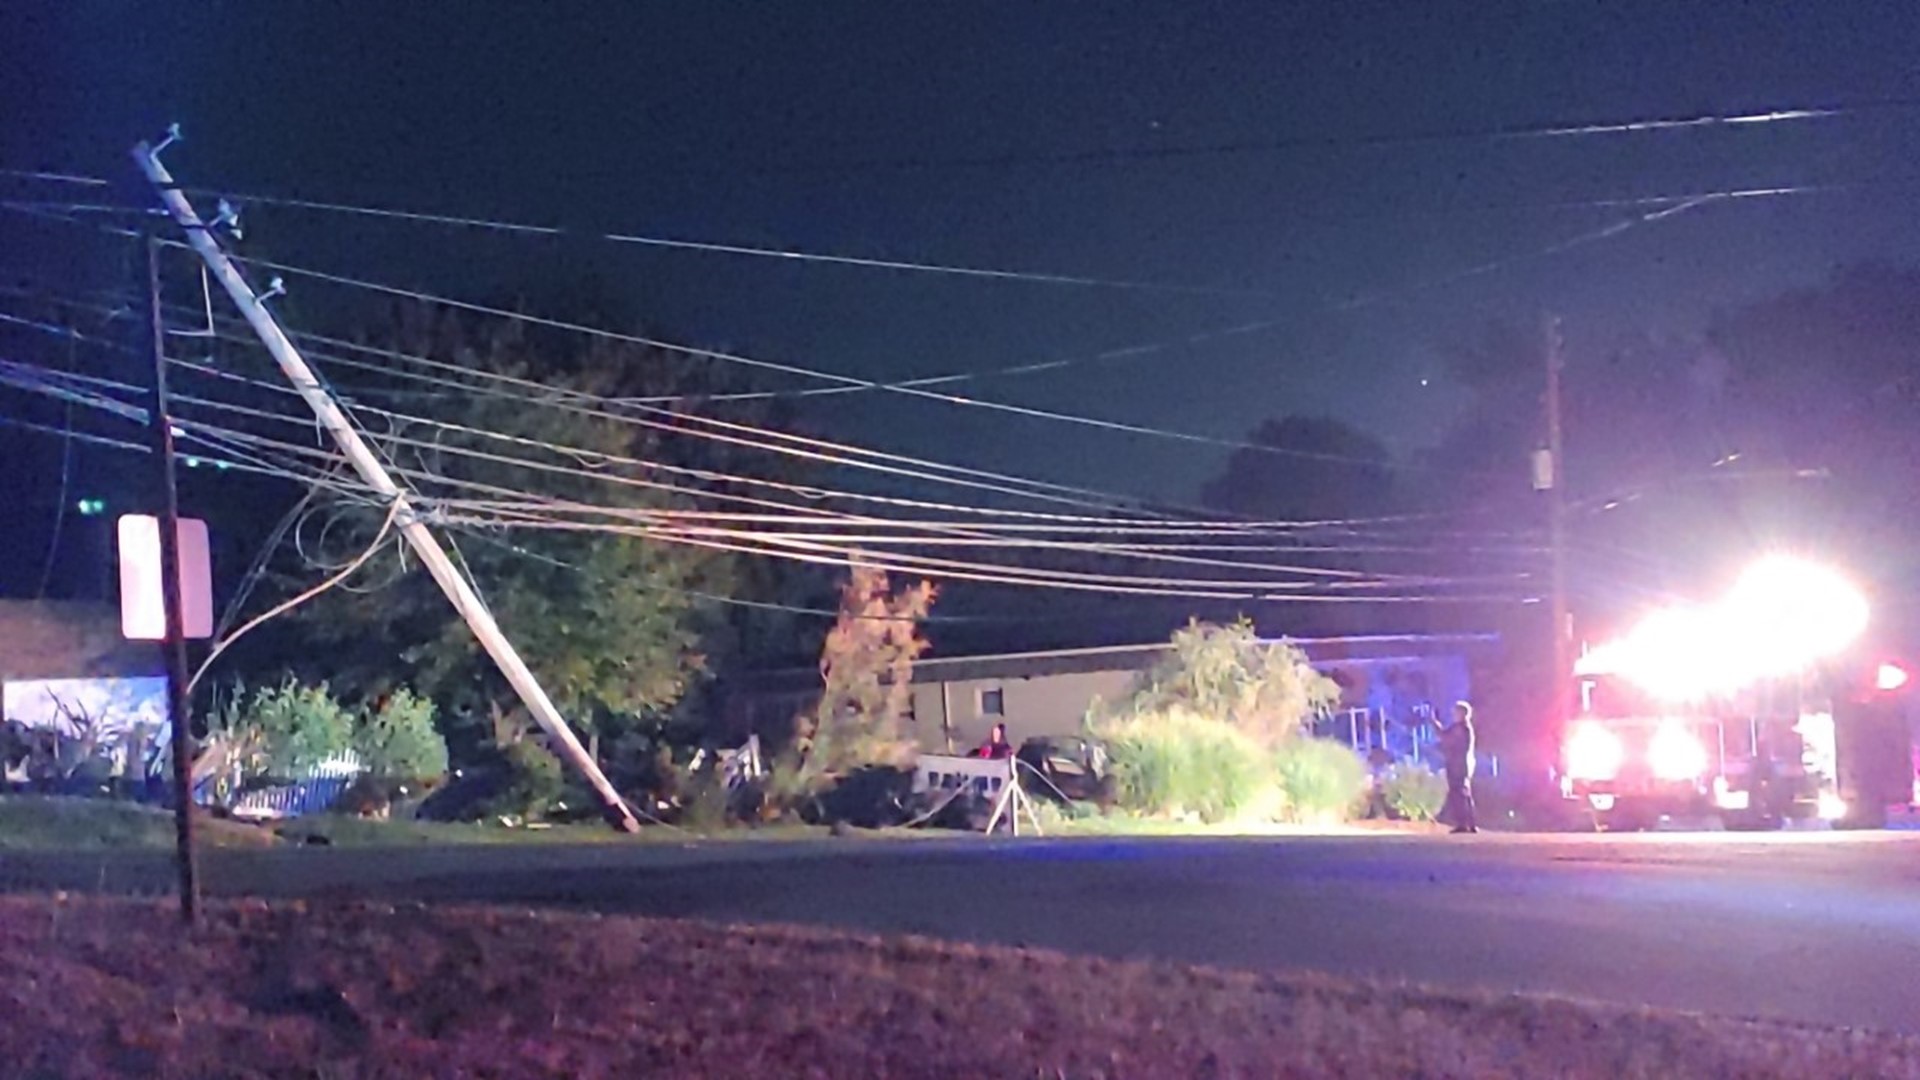 An SUV veered off the road and crashed into a utility pole Thursday night in Scranton.